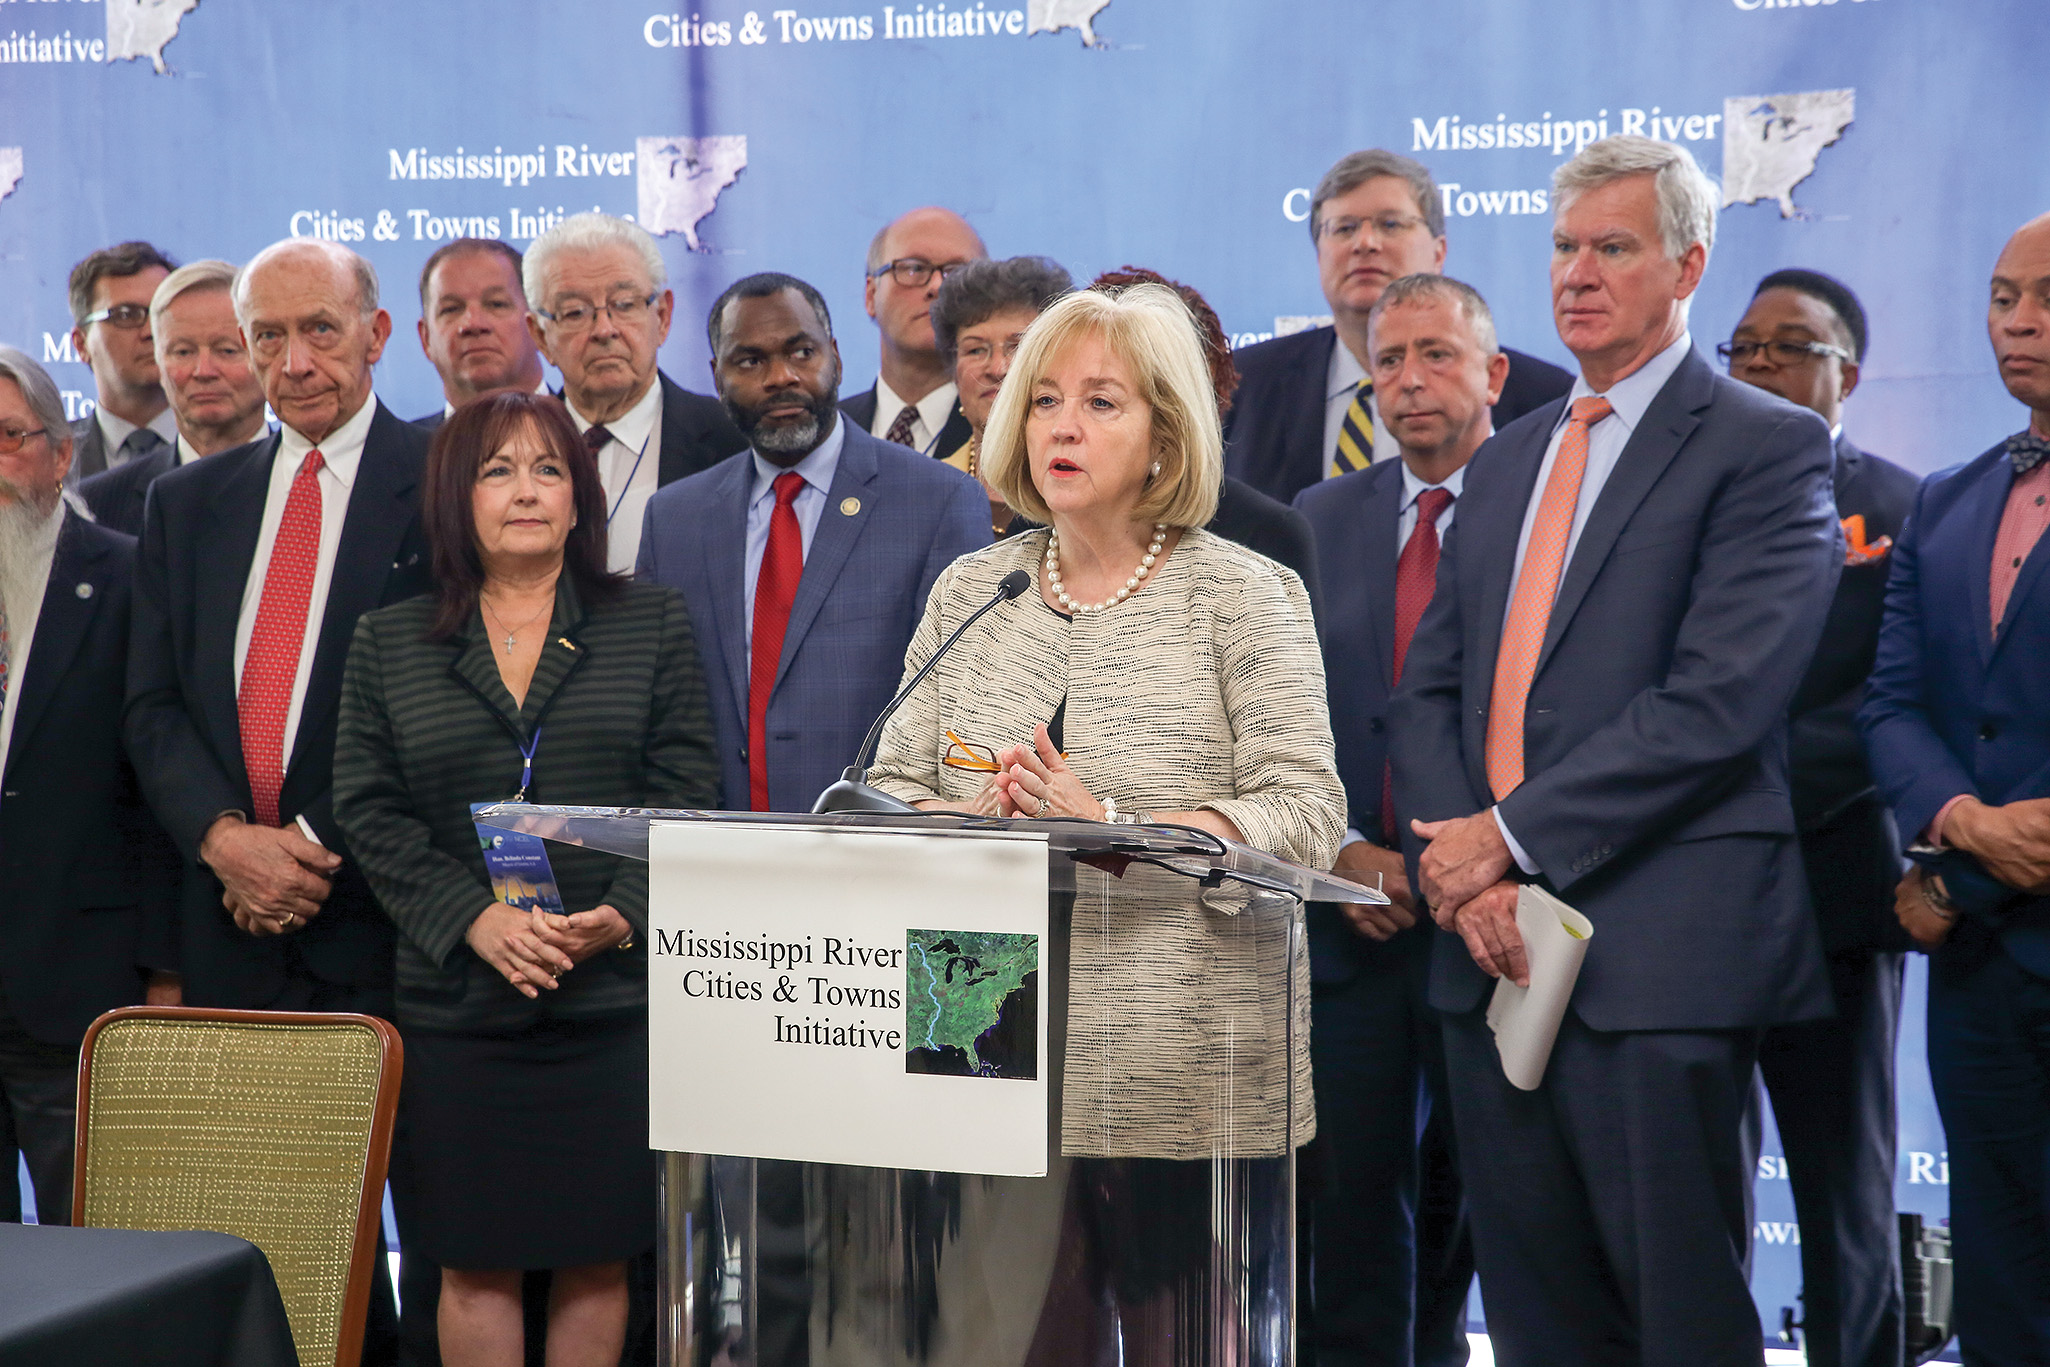 Flanked by mayors of other Mississippi River communities, St. Louis Mayor Lyda Krewson addresses attendees at a recent St. Louis meeting of Mississippi River Cities and Towns Initiative.